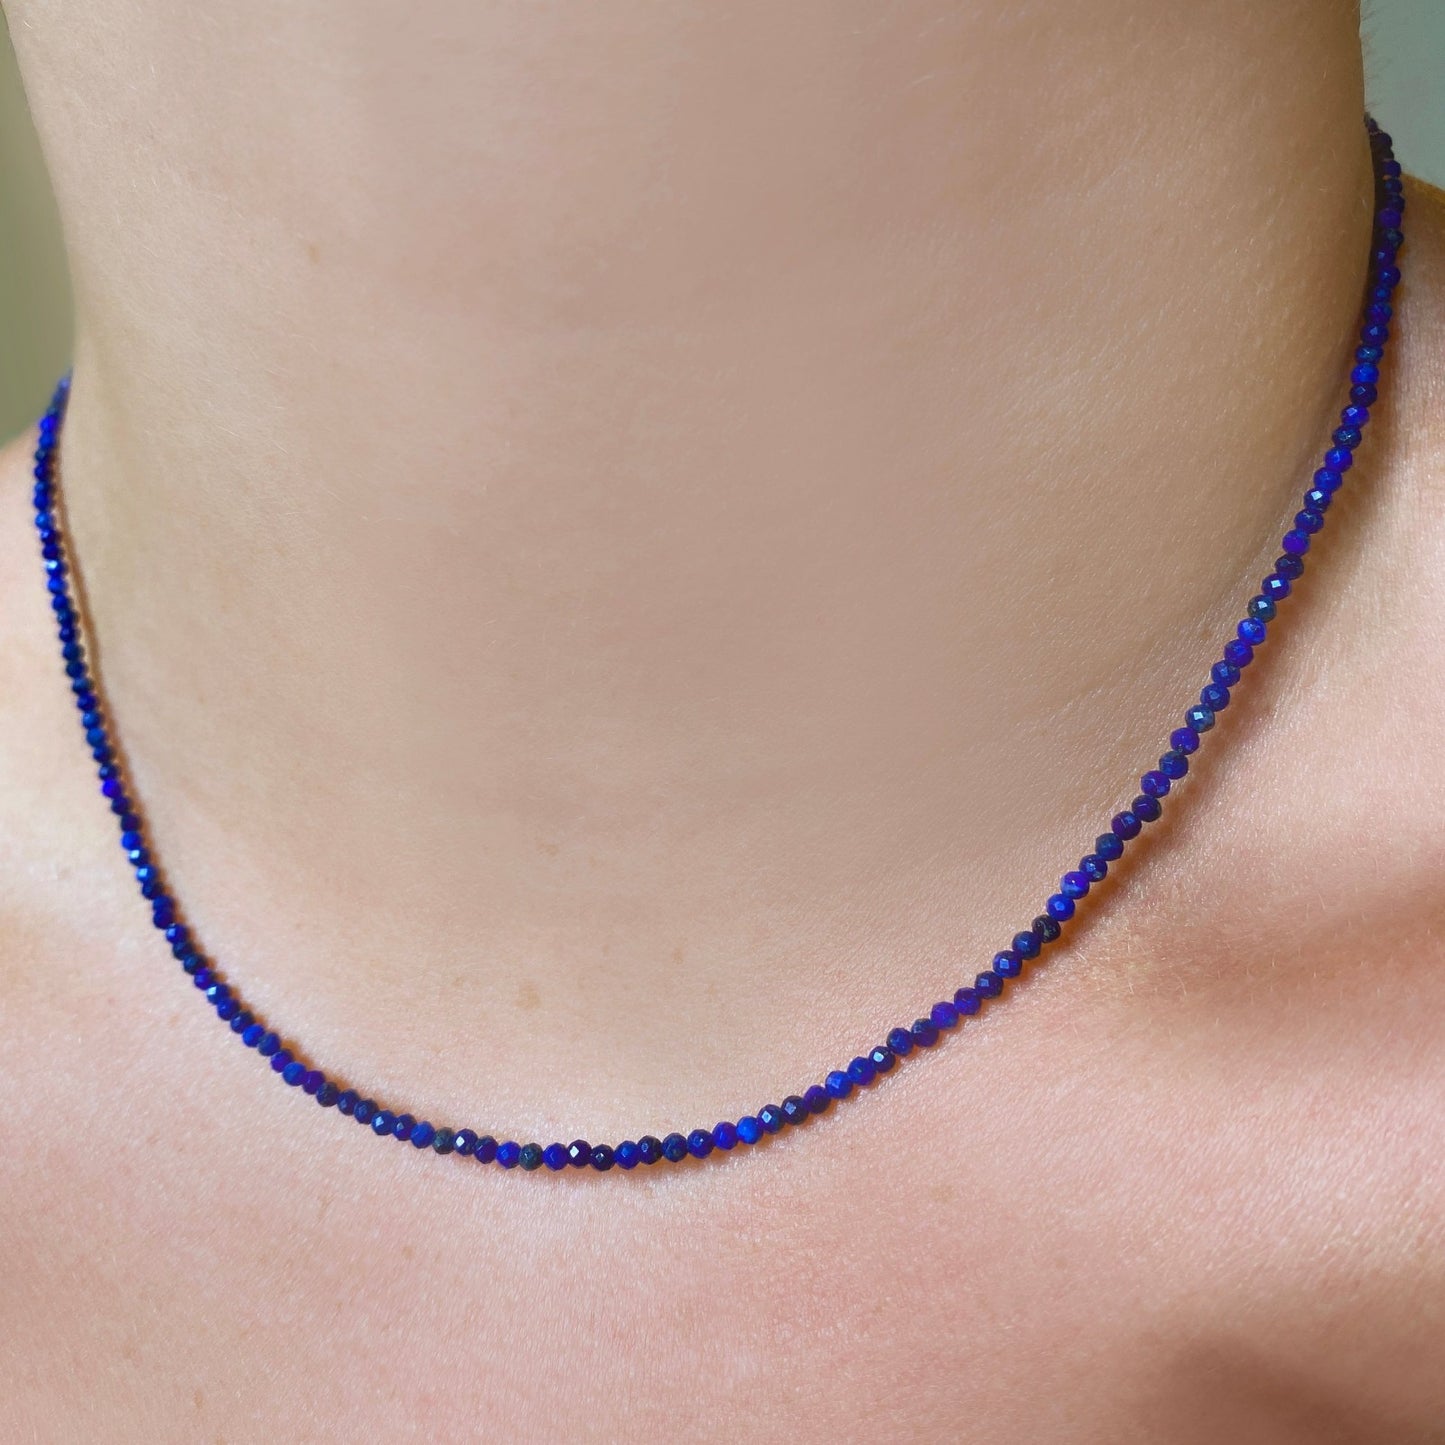 Shimmering beaded necklace made of 2mm faceted opals in shades of blue on a gold linking lobster clasp.